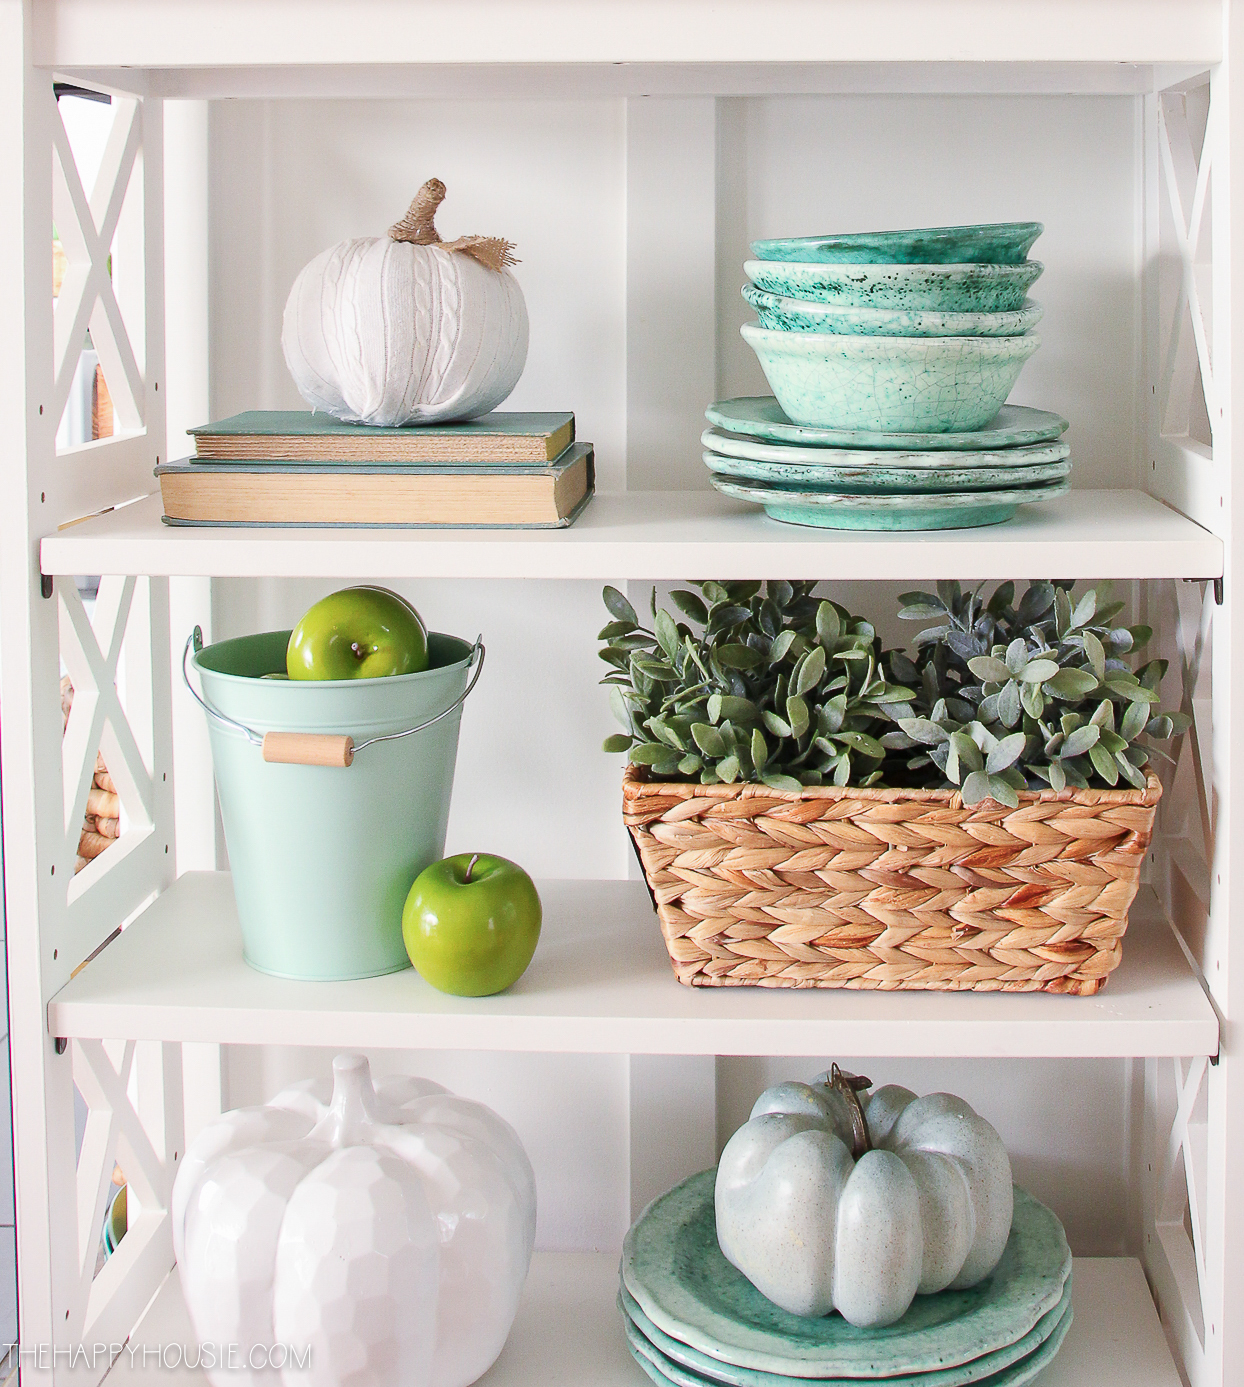 Open shelves with a bucket of green apples, green dishes and white pumpkins.